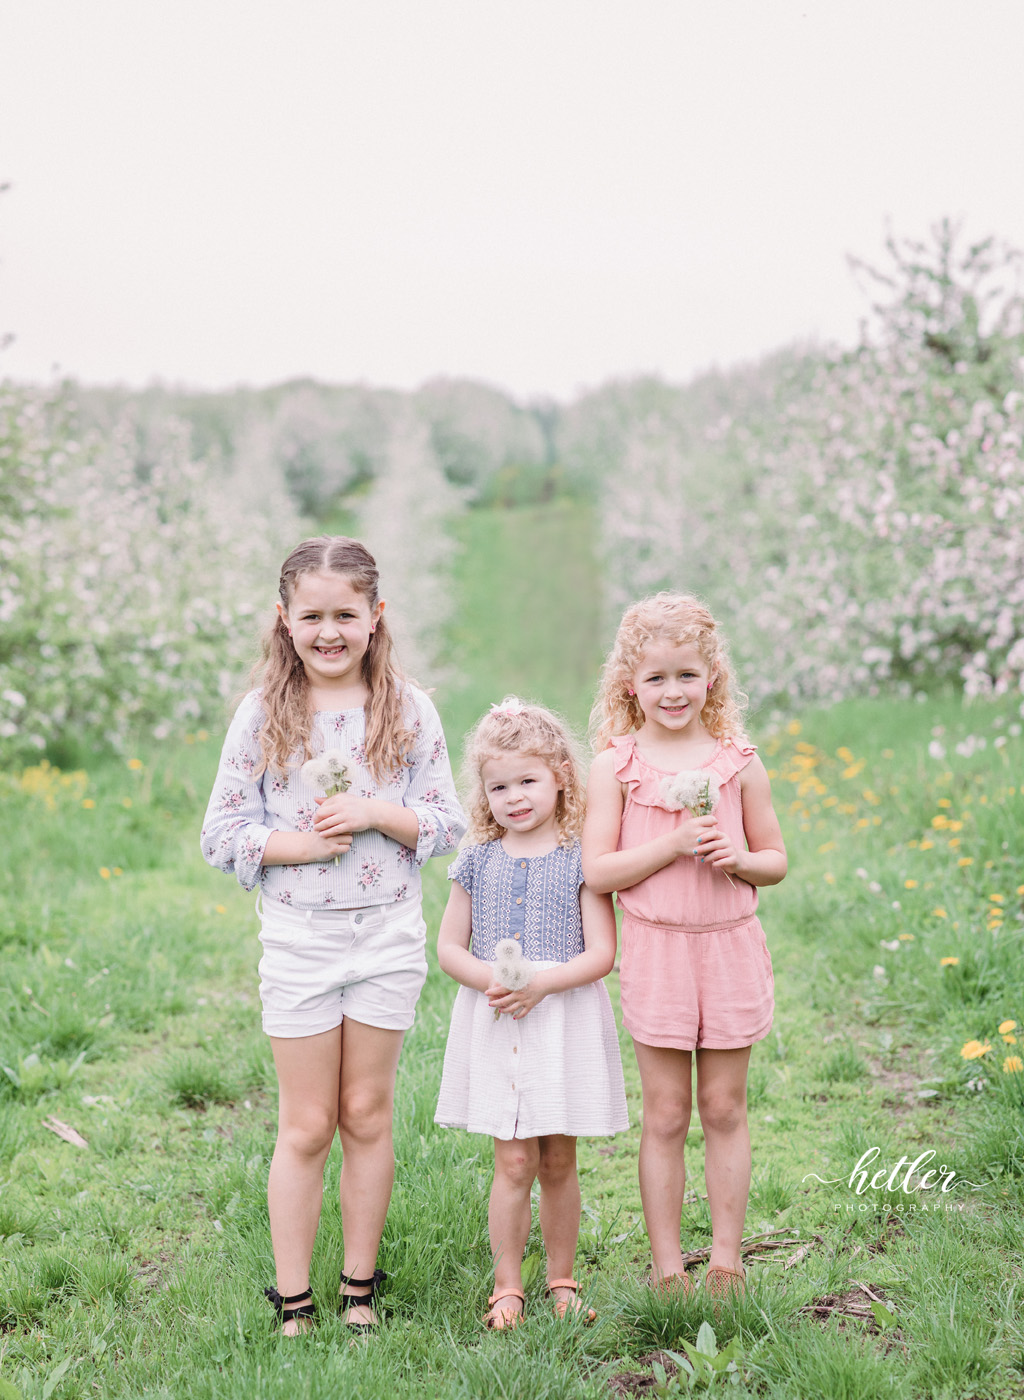 Rockford Michigan spring family photo session at an apple orchard with apple blossoms